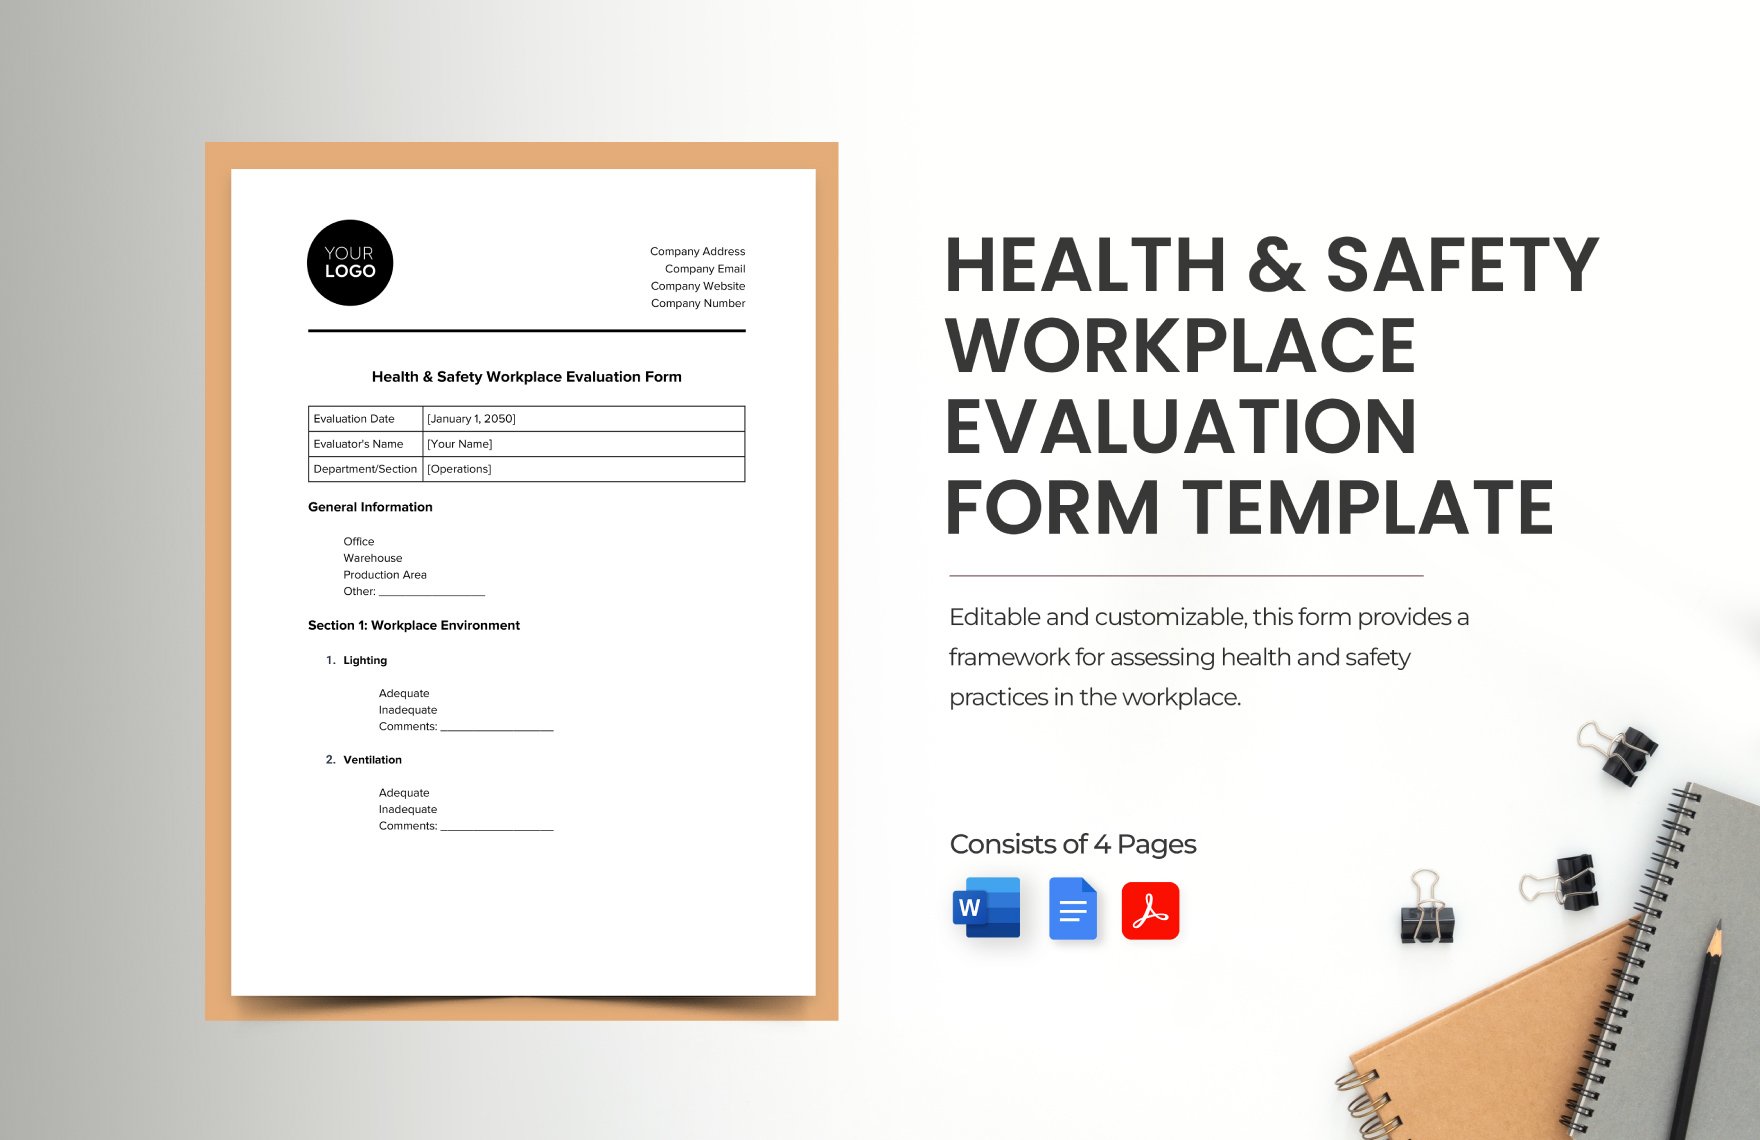 Health & Safety Workplace Evaluation Form Template in Word, Google Docs, PDF